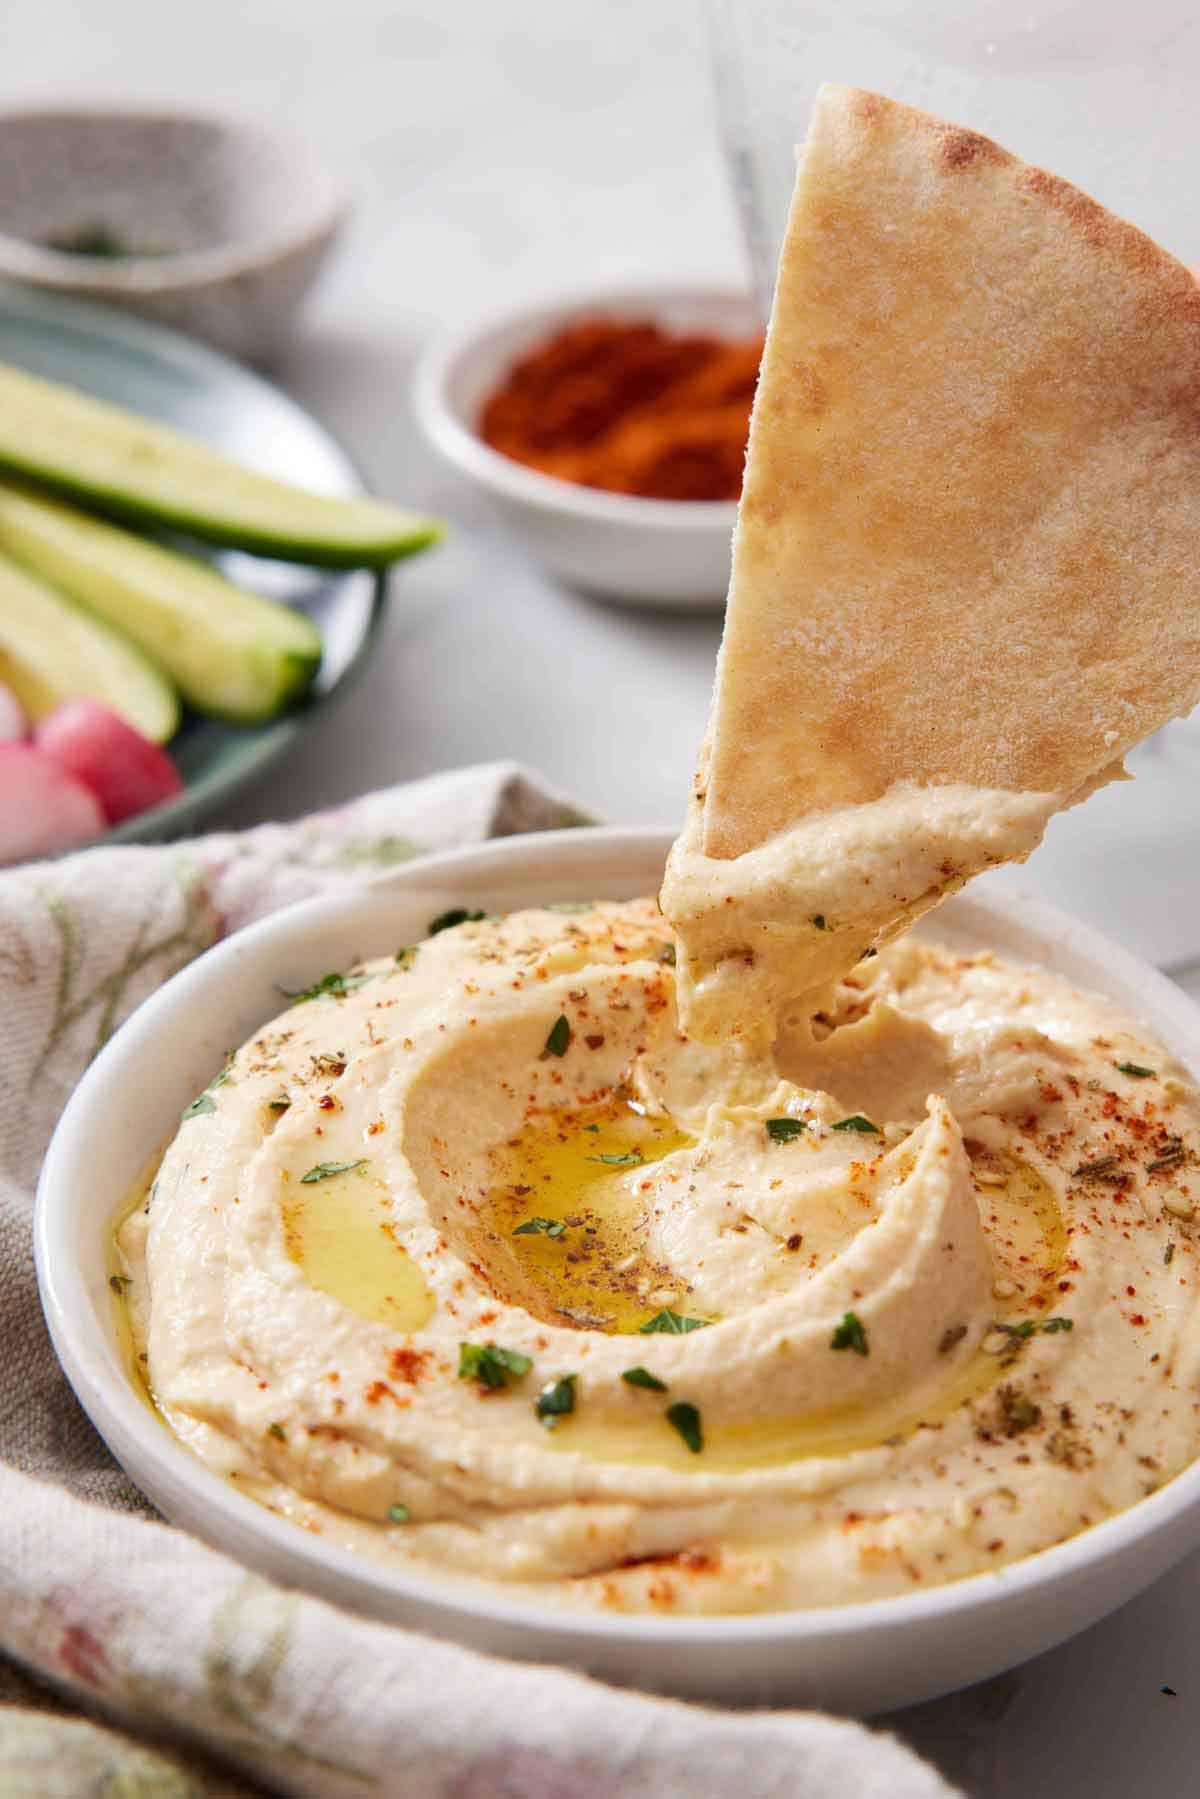 A piece of pita bread dipped into a bowl of hummus.